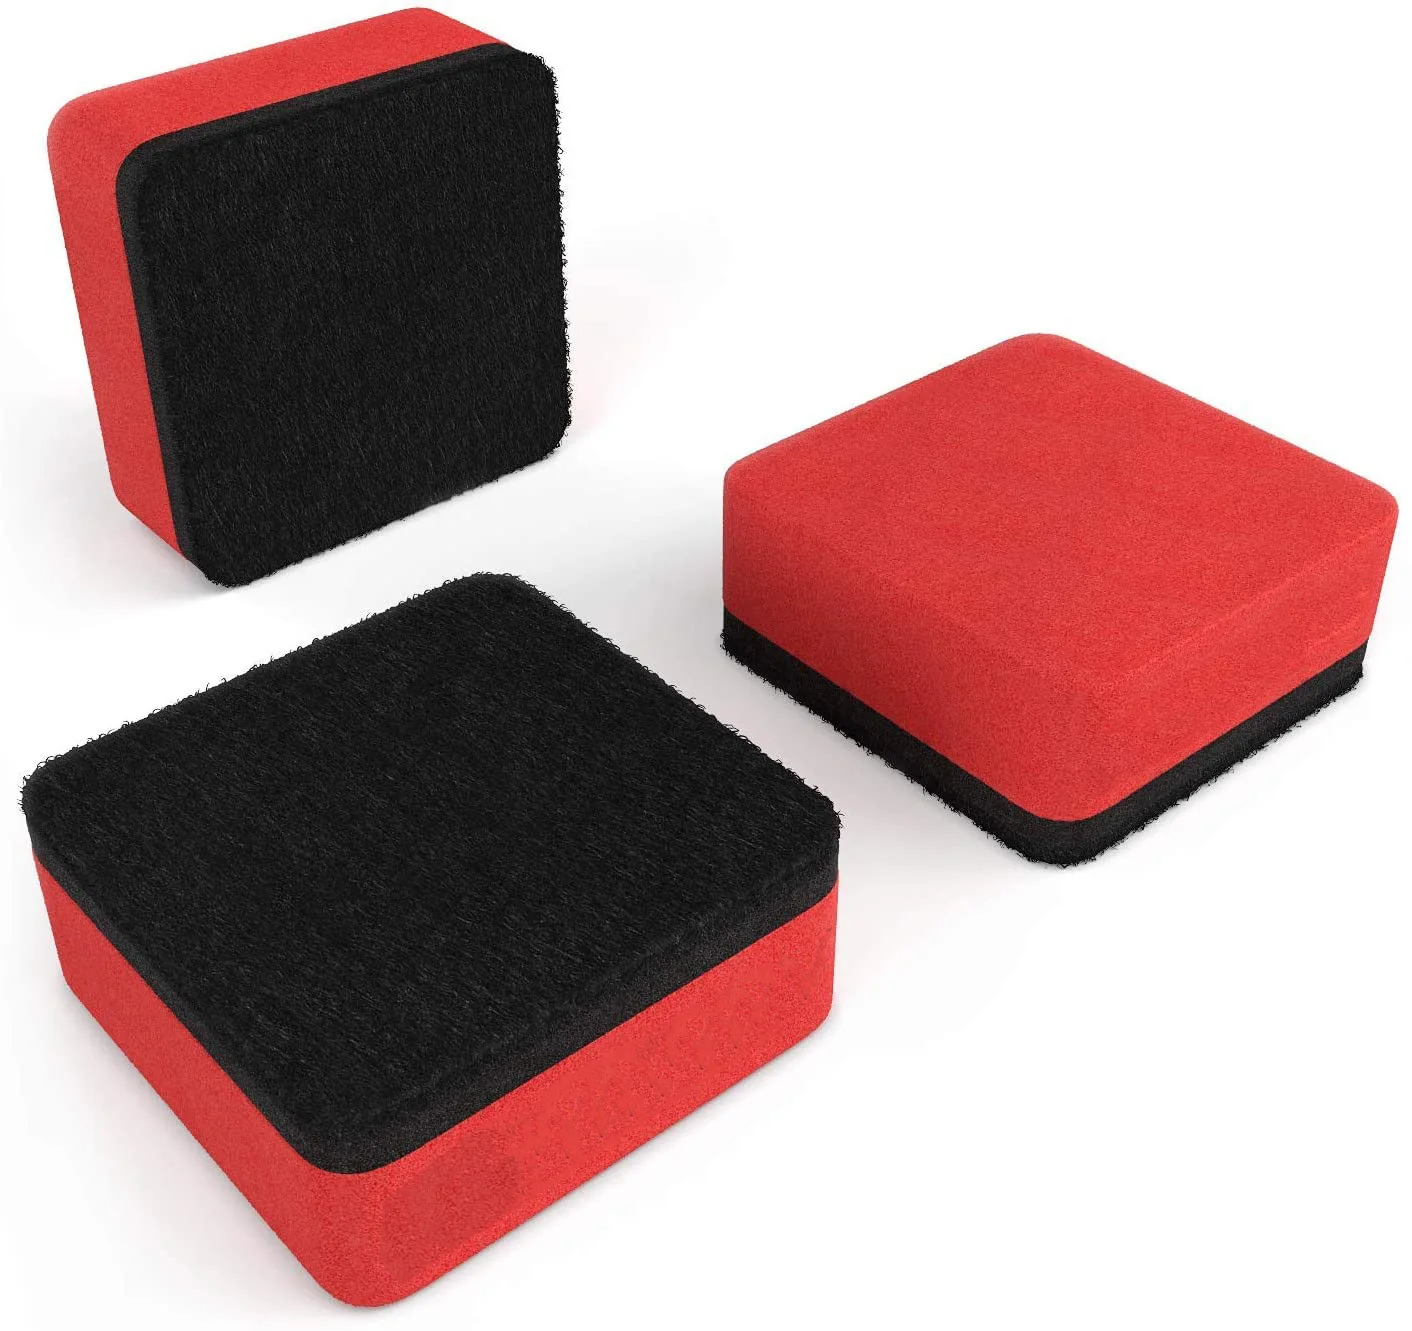 Small Magnetic Whiteboard Dry Erasers, Perfect for the Office, Casa, or Classroom